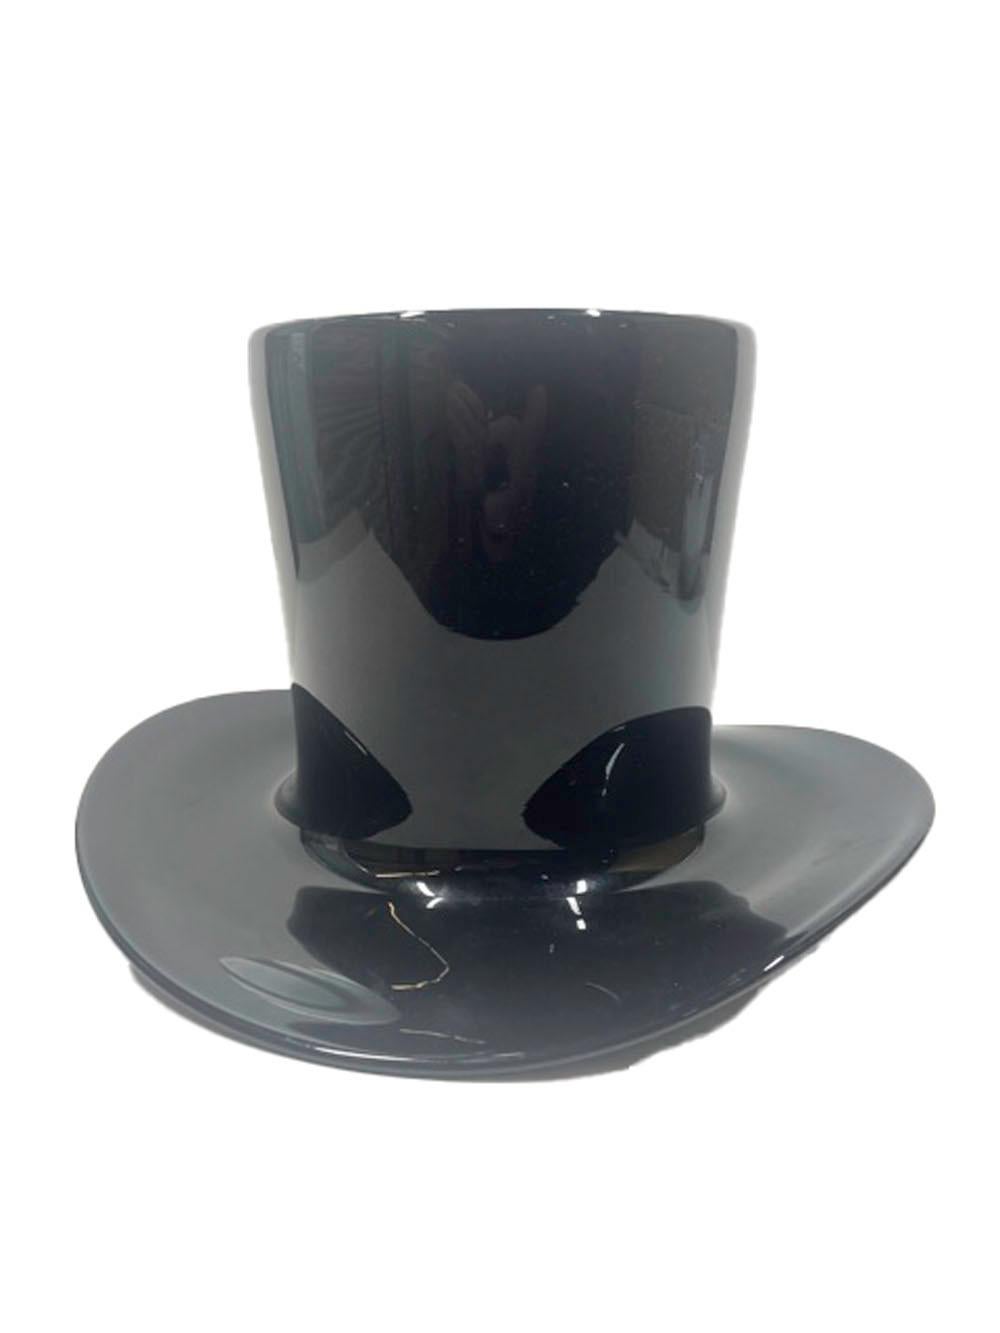 Mid-Century Modern champagne / wine cooler or ice bucket in the form of a black glass top hat made by Blenko of West Virginia.